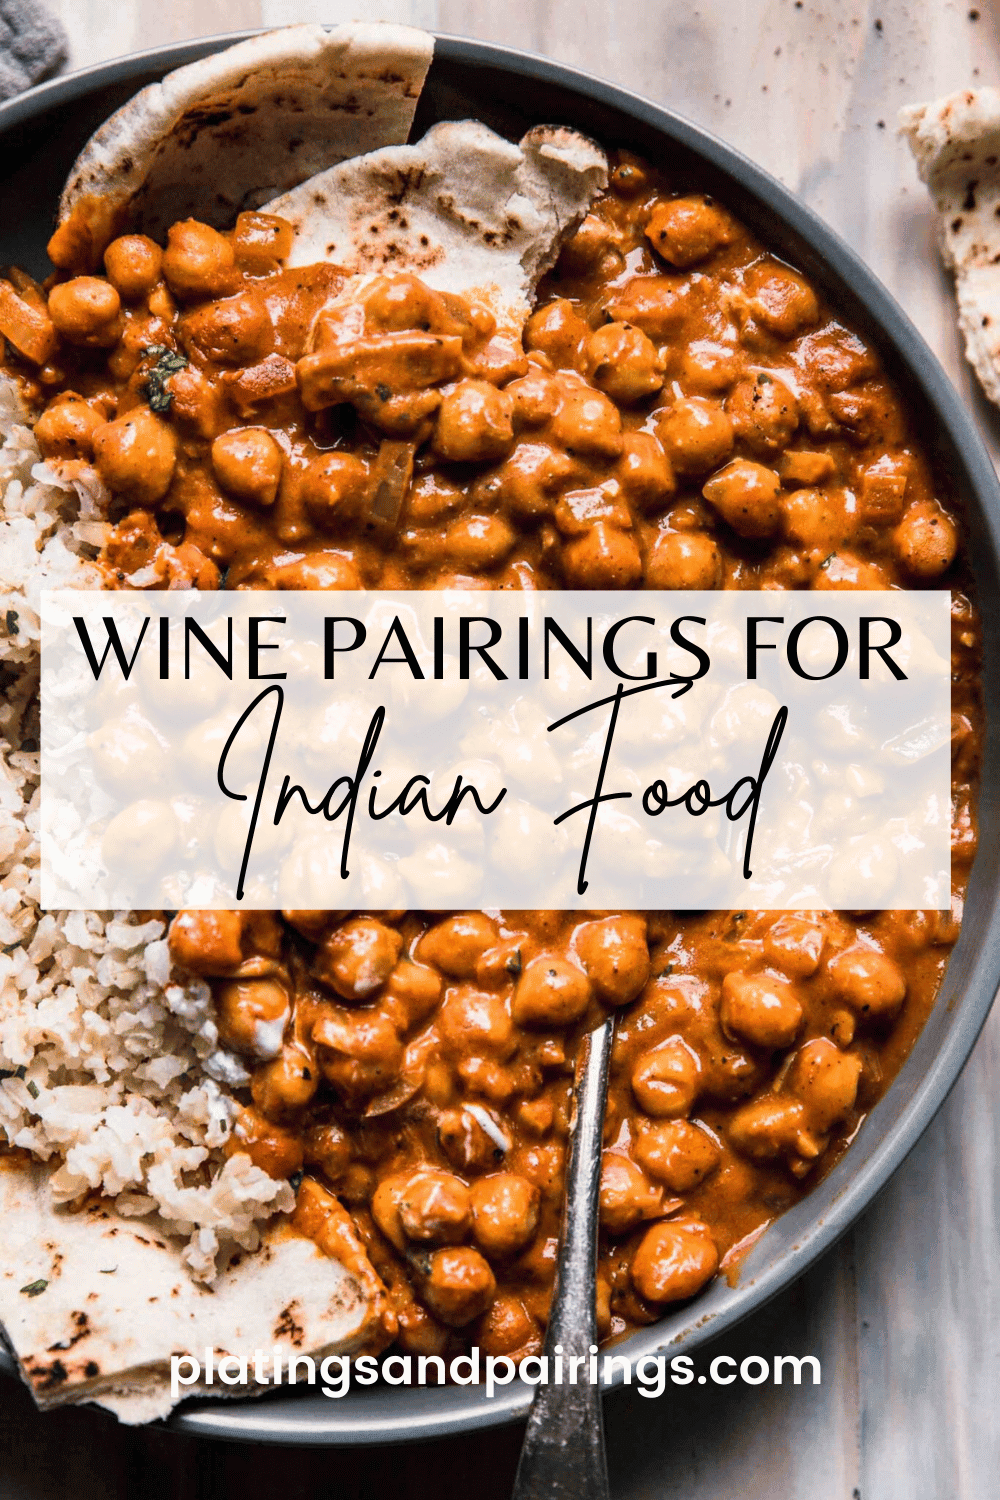 Wine pairings for indian food cover image.